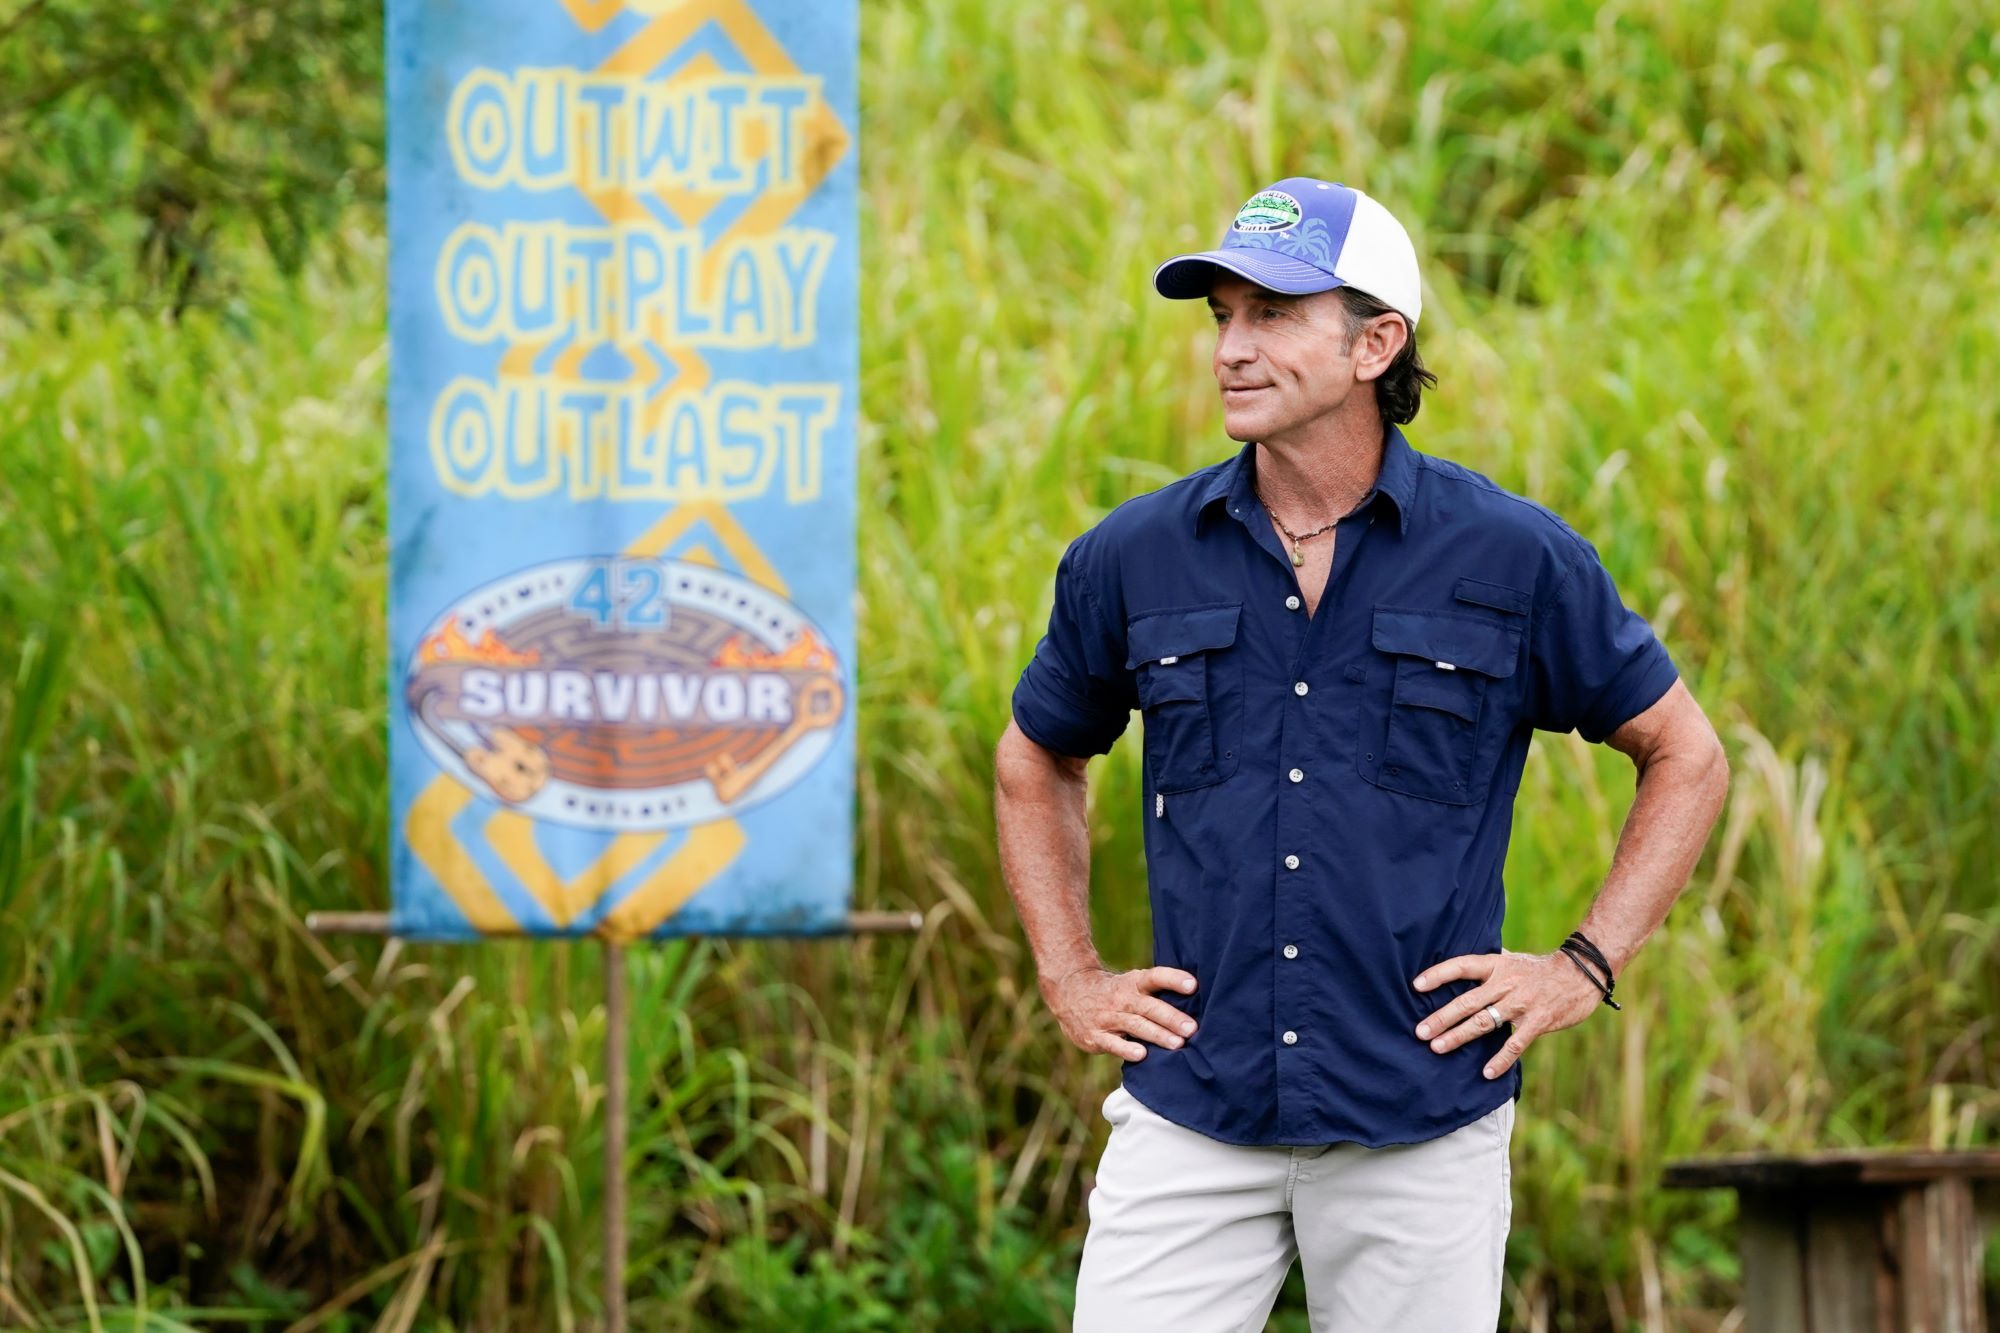 Jeff Probst, who hosts a new episode of 'Survivor' Season 42 tonight, March 23, wears a dark blue button-up shirt with the sleeves rolled up to his elbows, light beige pants, and a blue, green, and white 'Survivor' baseball hat.